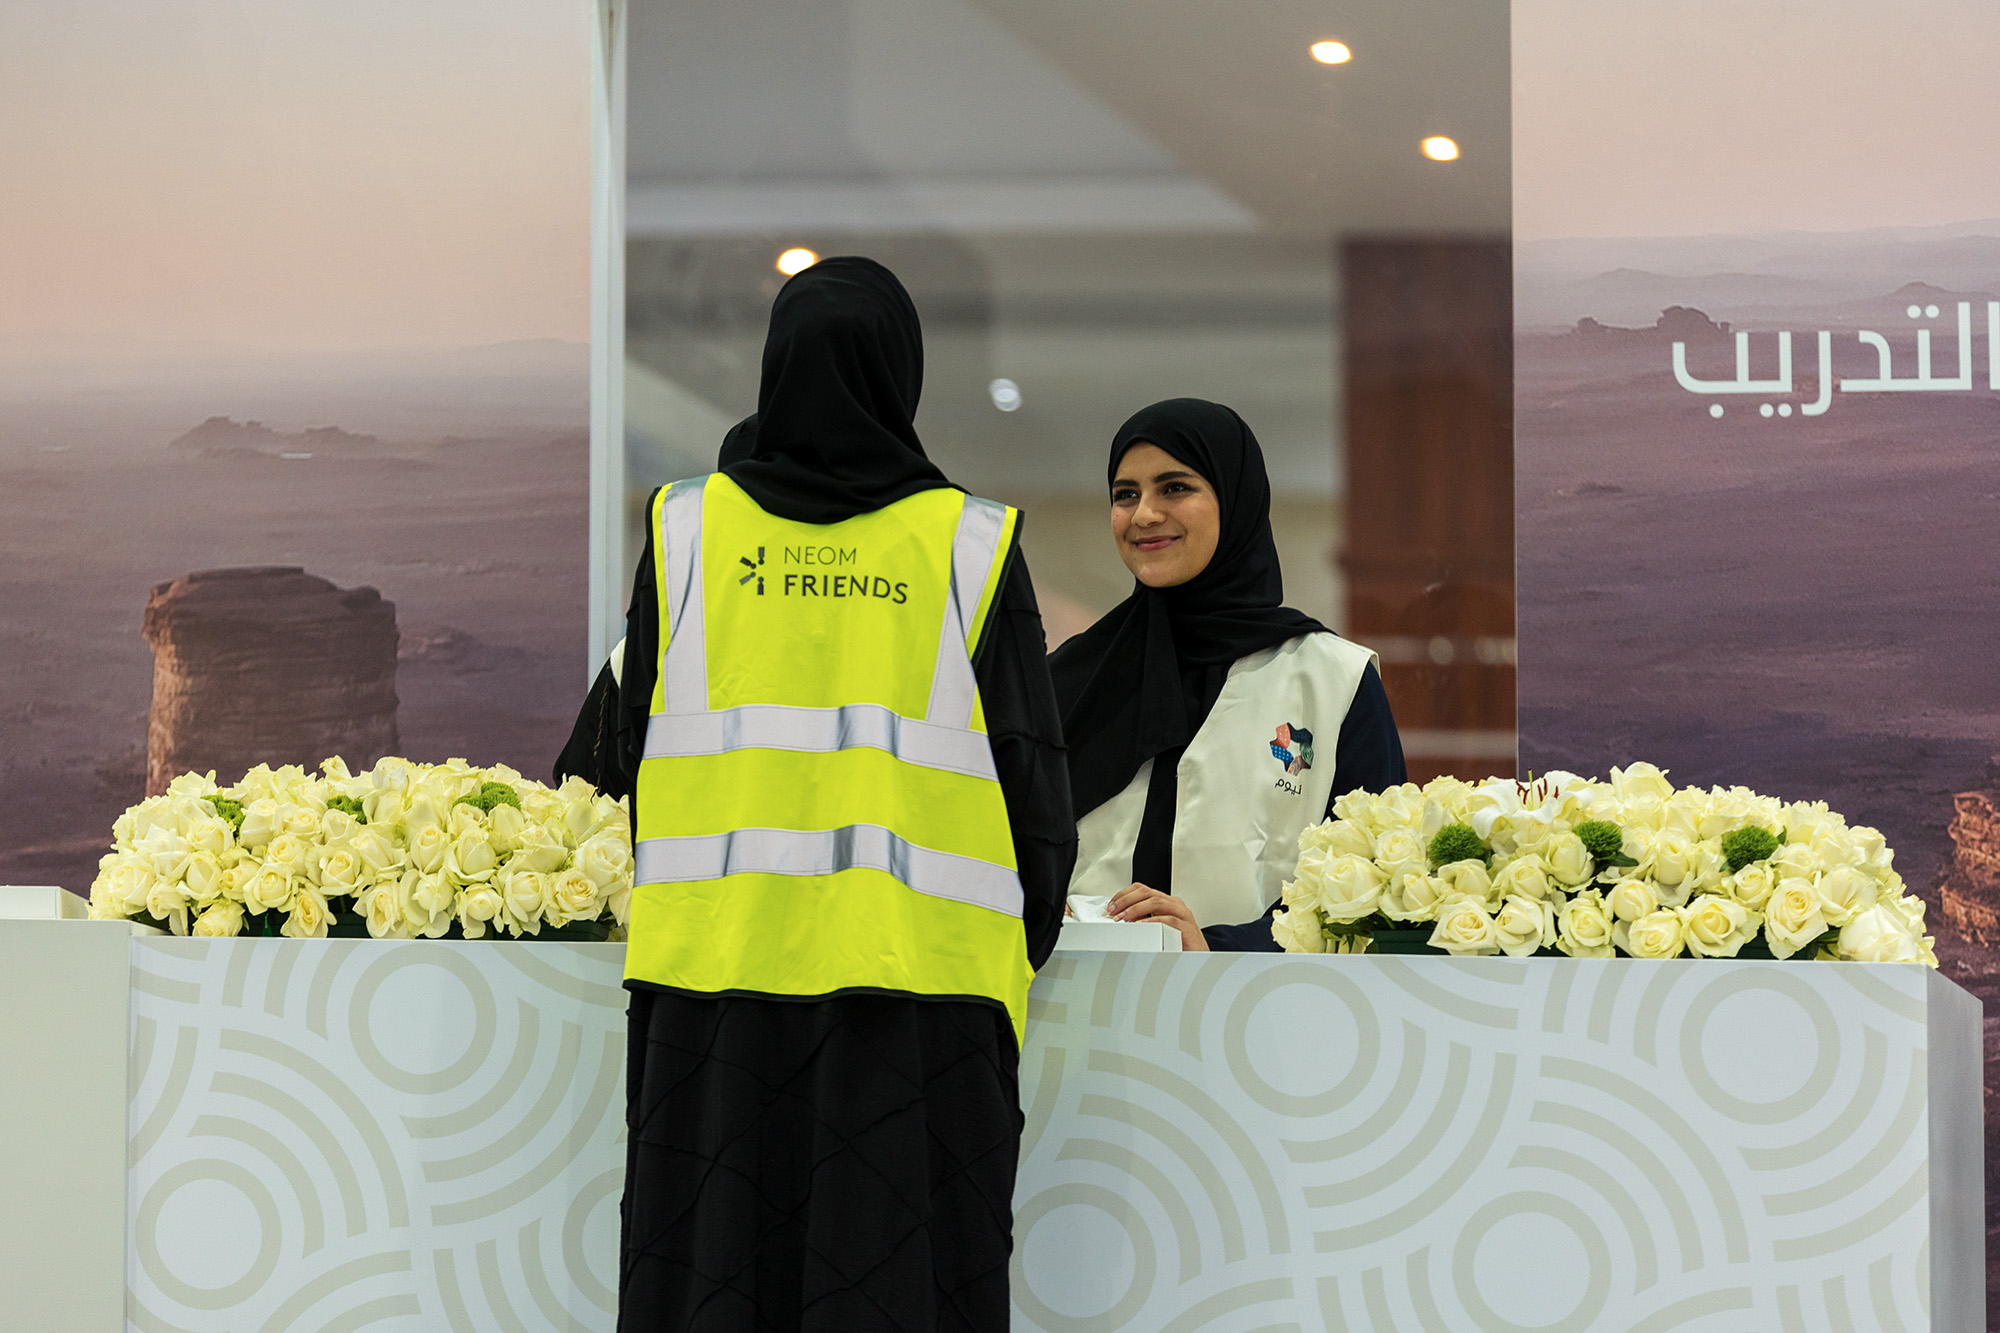 Two NEOM employees are part of NEOM Friends